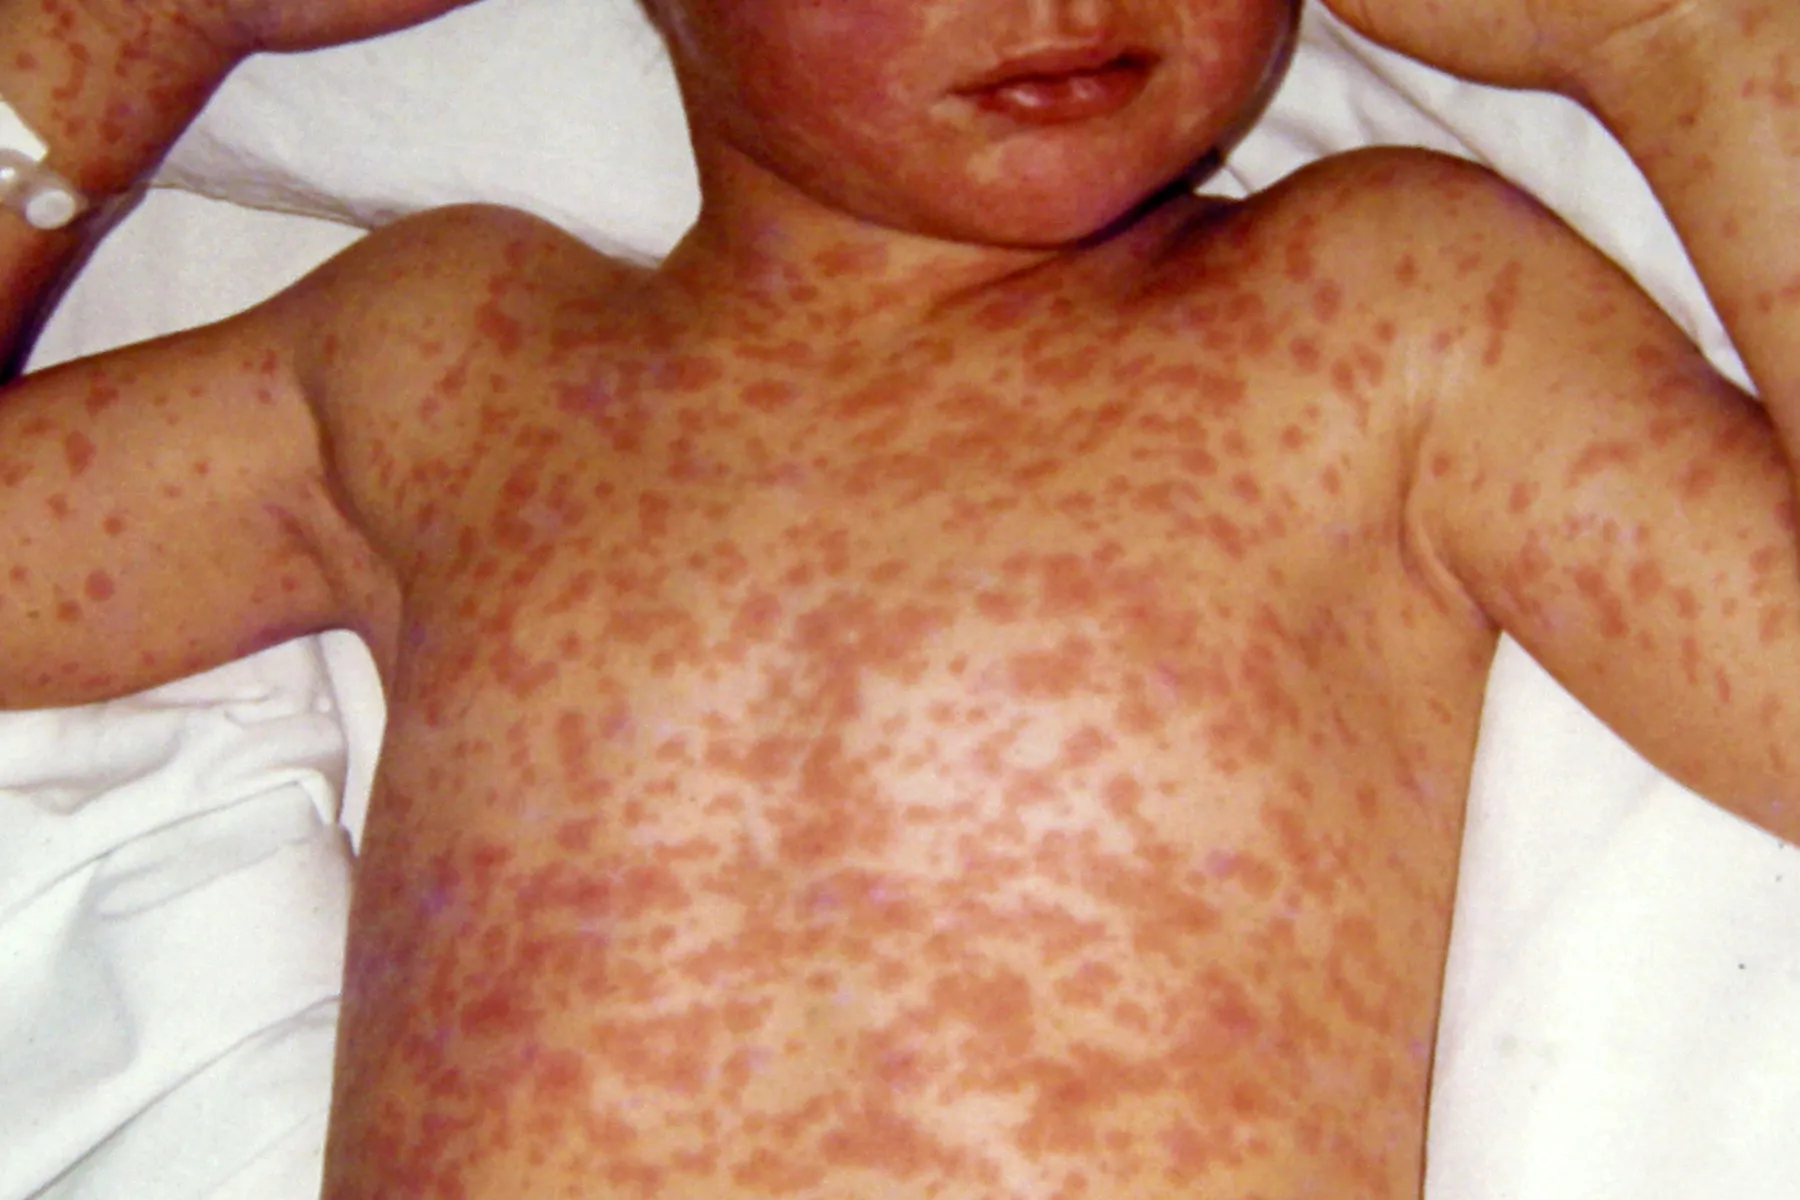 With Case Count Rising, CDC Issues Nationwide Measles Alert - WebMD